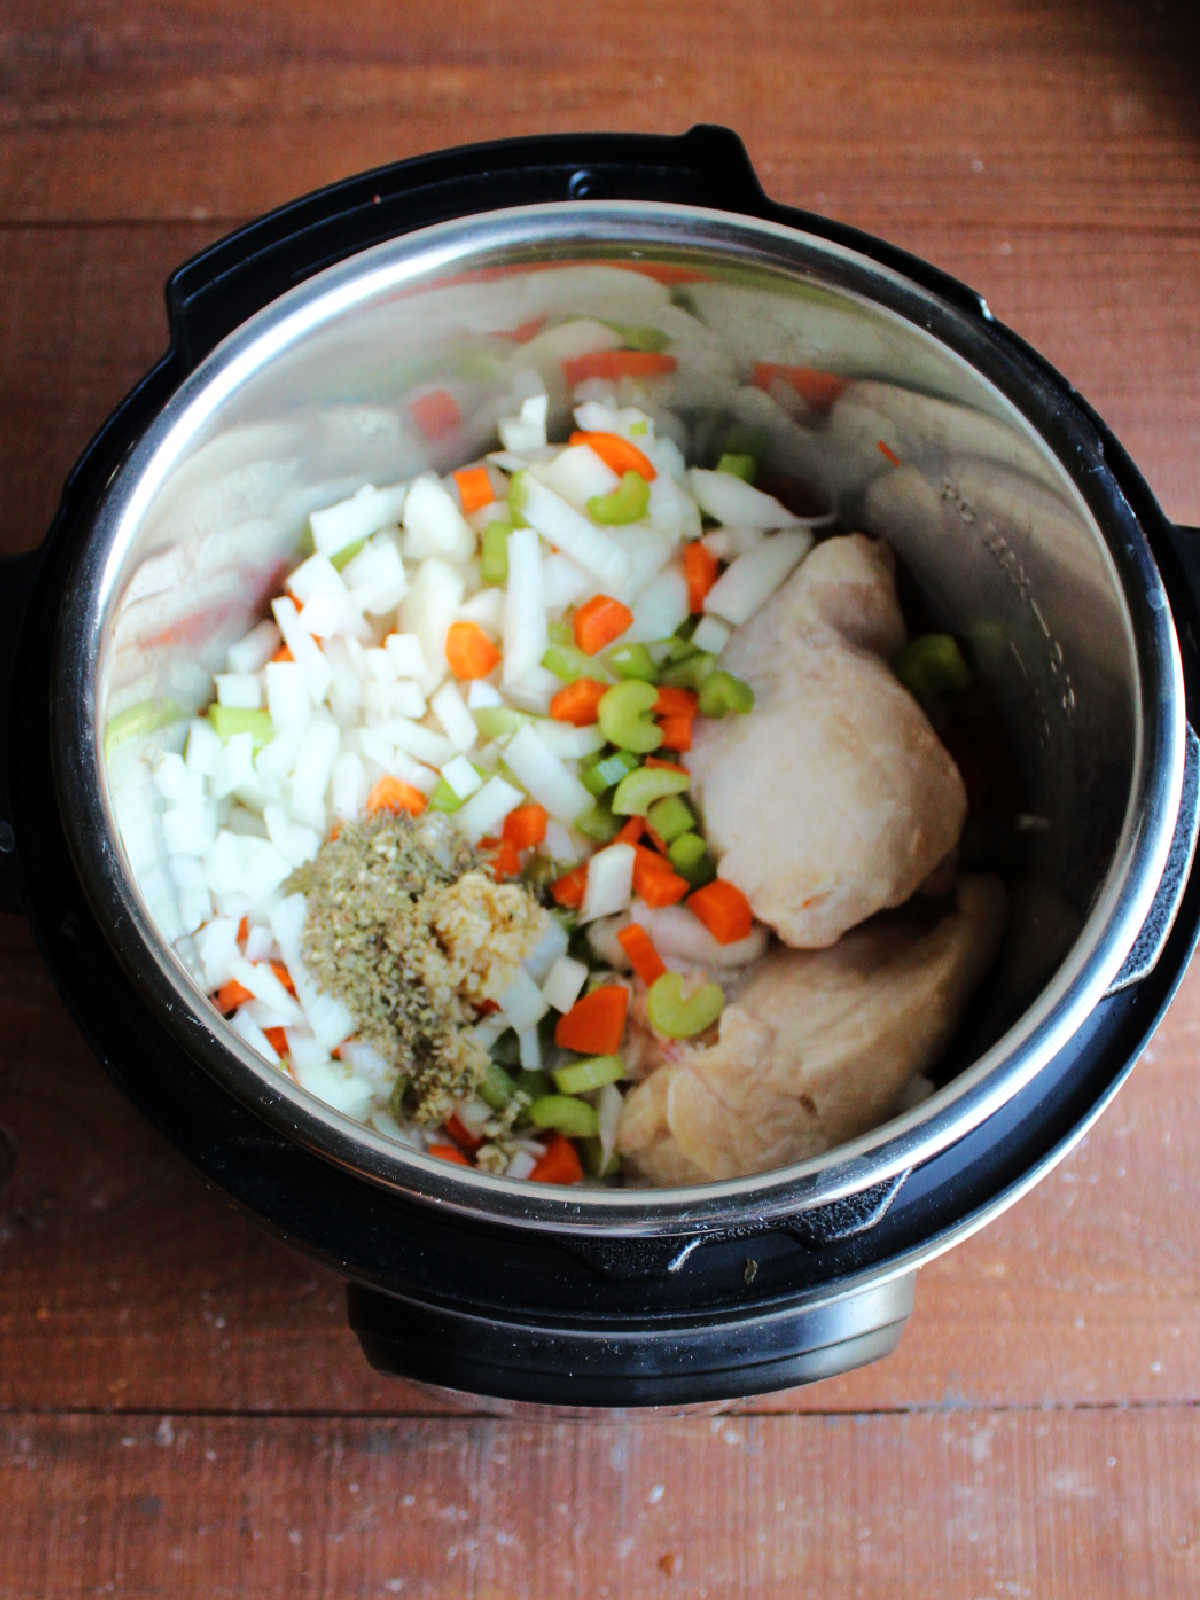 Instant pot with frozen chicken breasts, diced onion, sliced carrots and celery, herbs, and garlic inside ready for to be cooked.